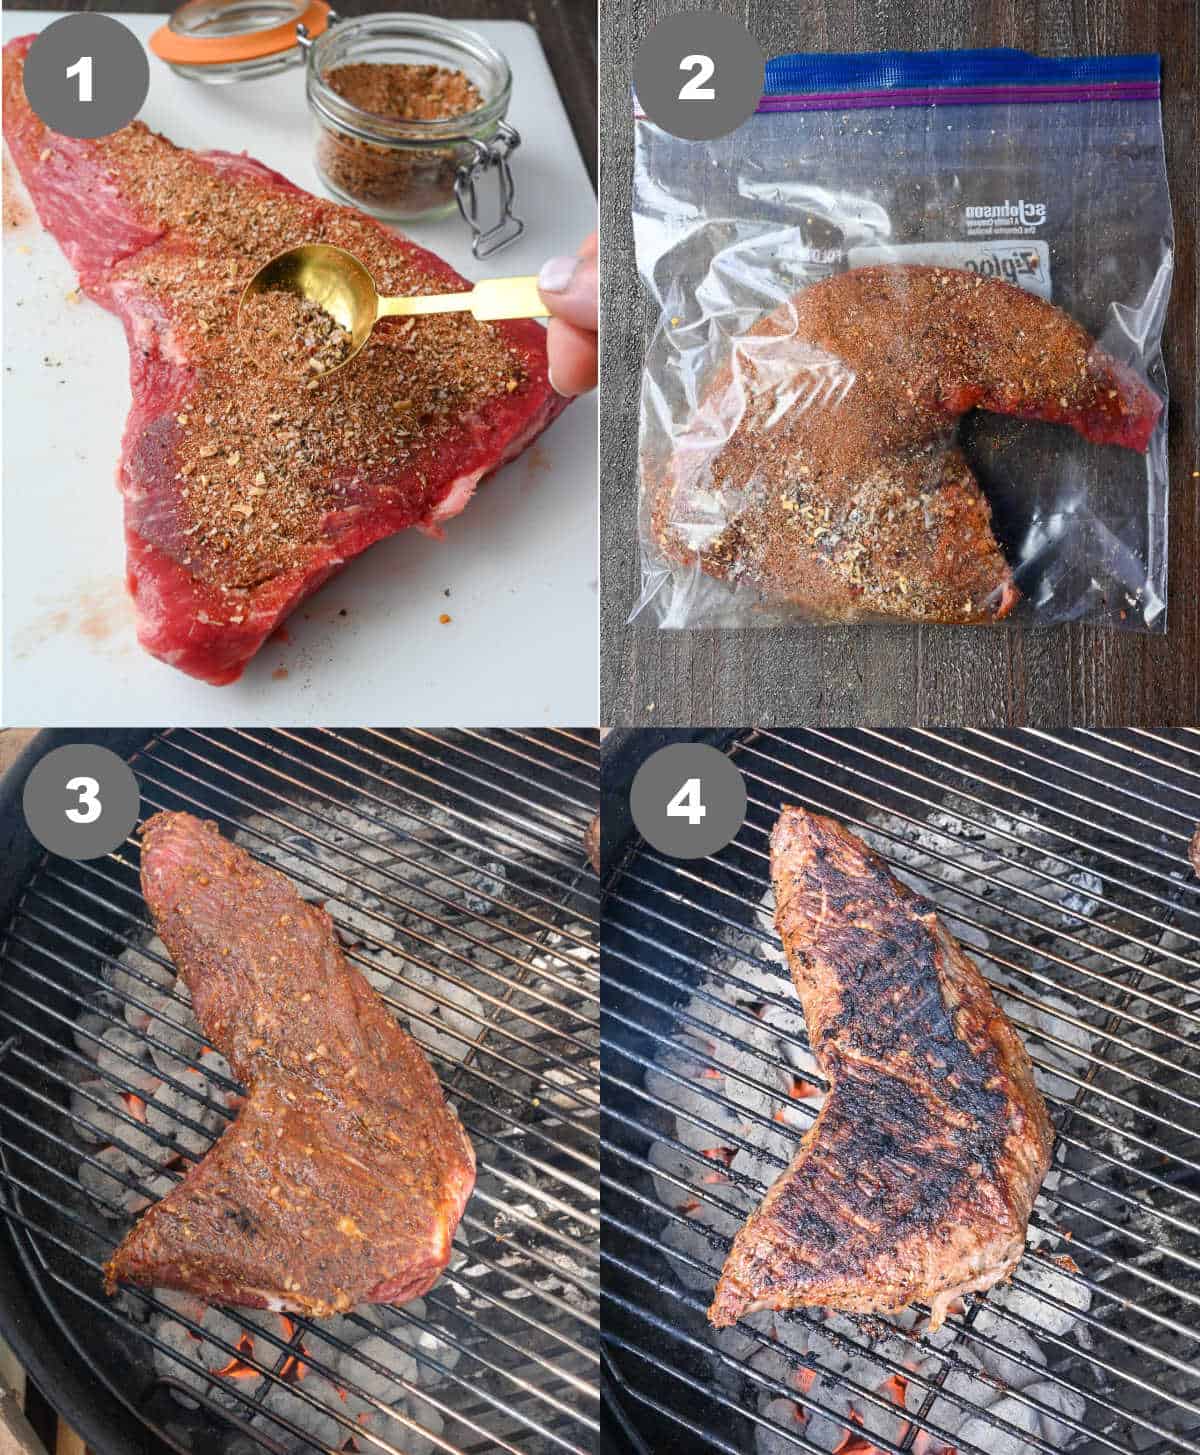 Steps 1 through 4 of making a grilled tri tip sandwich.